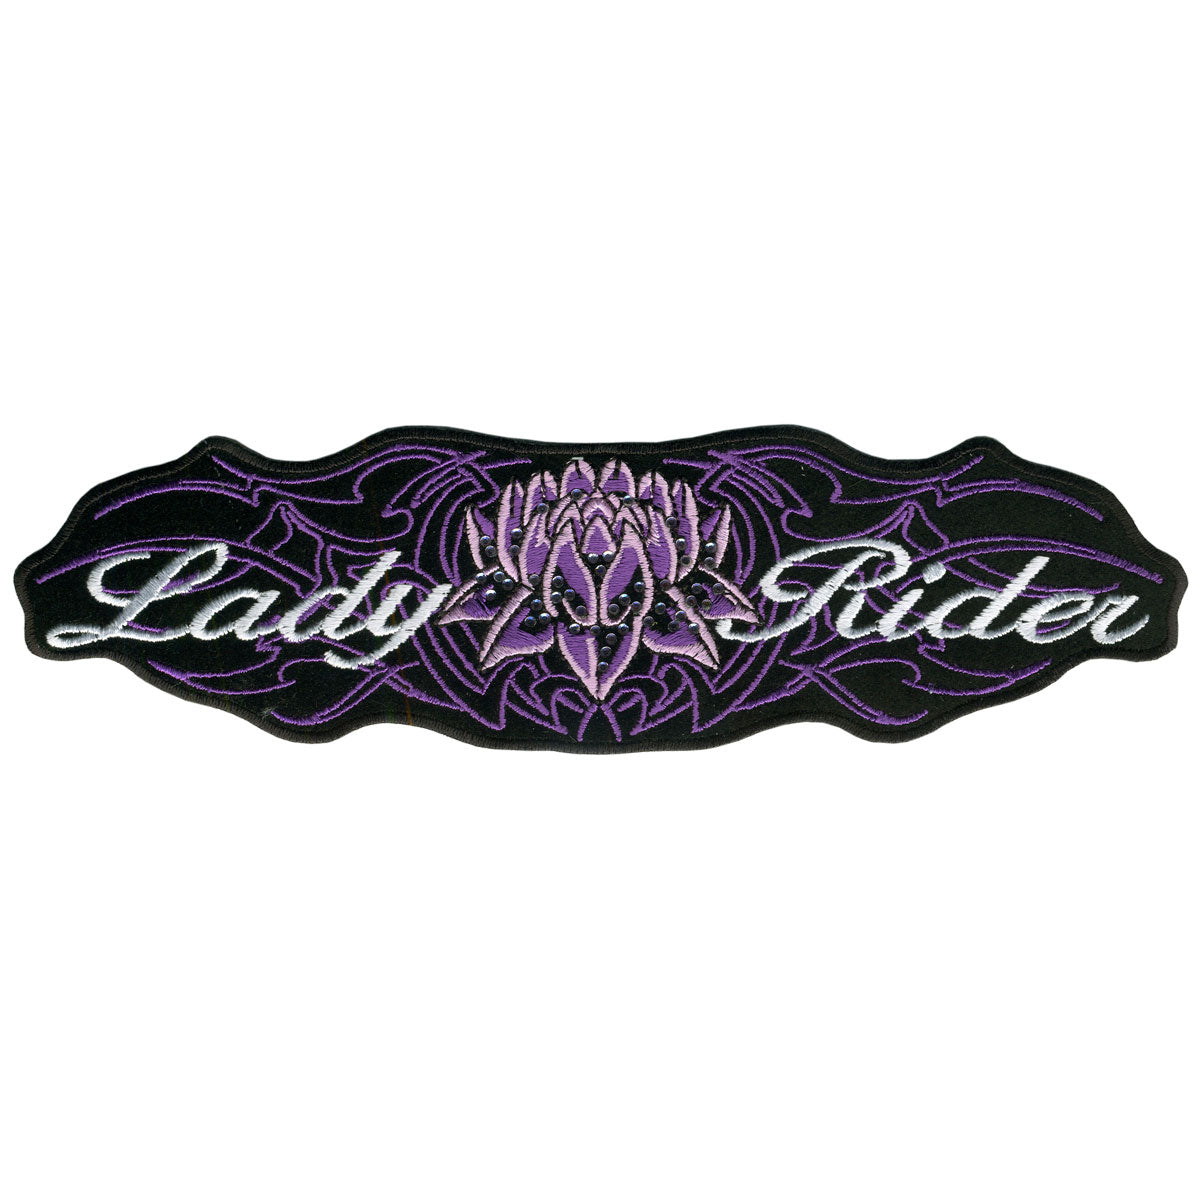 Hot Leathers Lady Rider Lotus 8" x 2" Patch